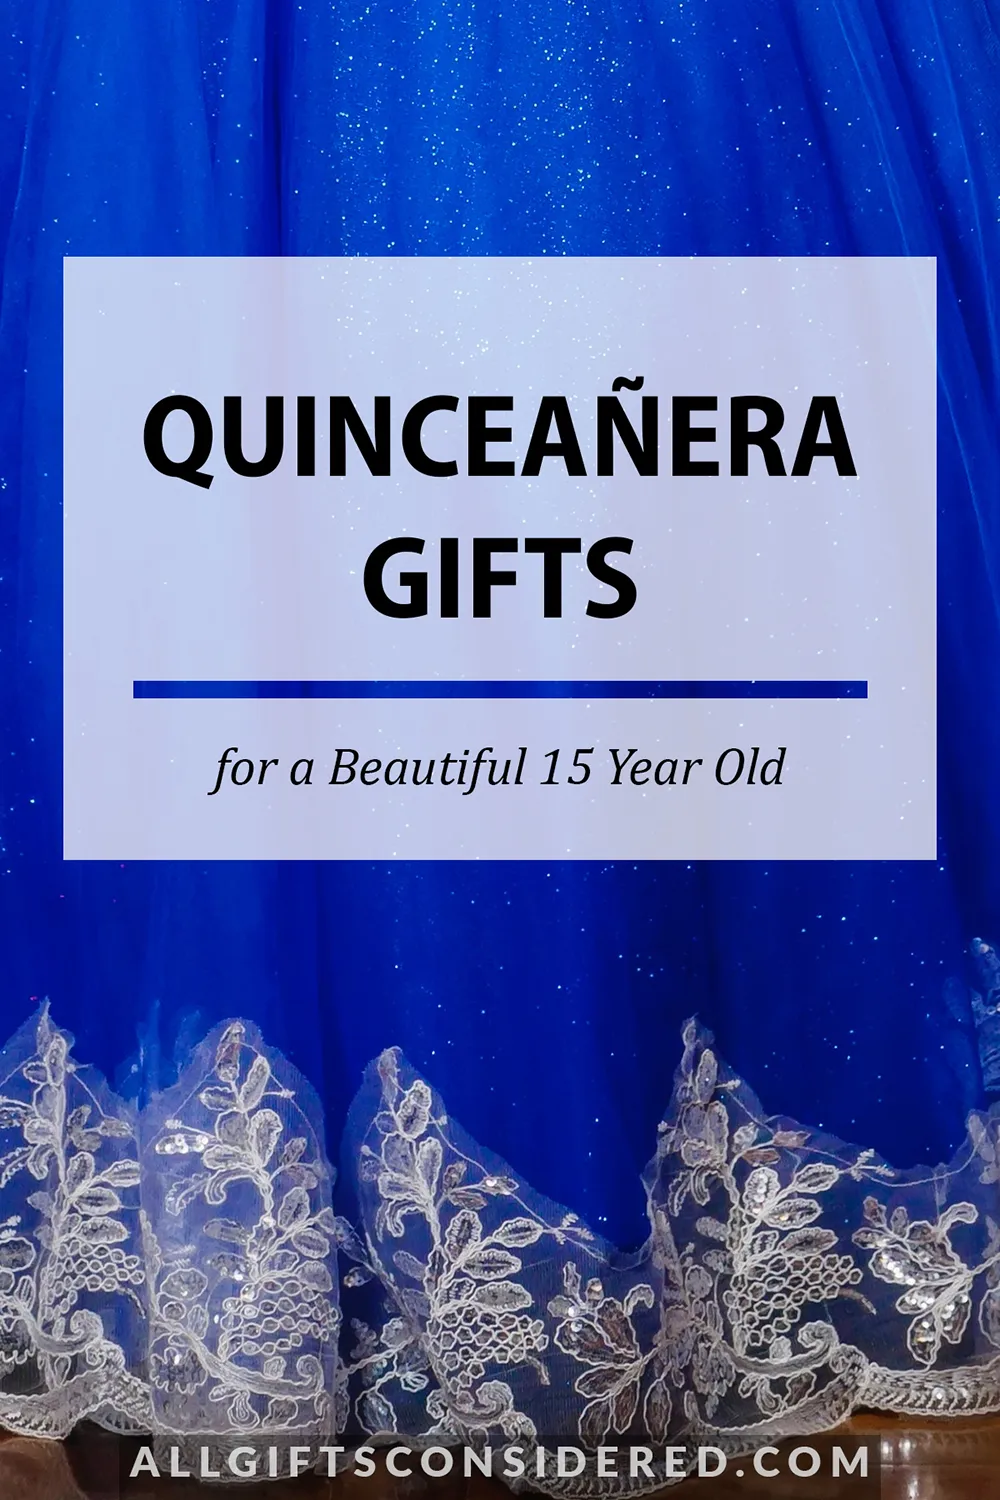 quinceanera gifts - feature image